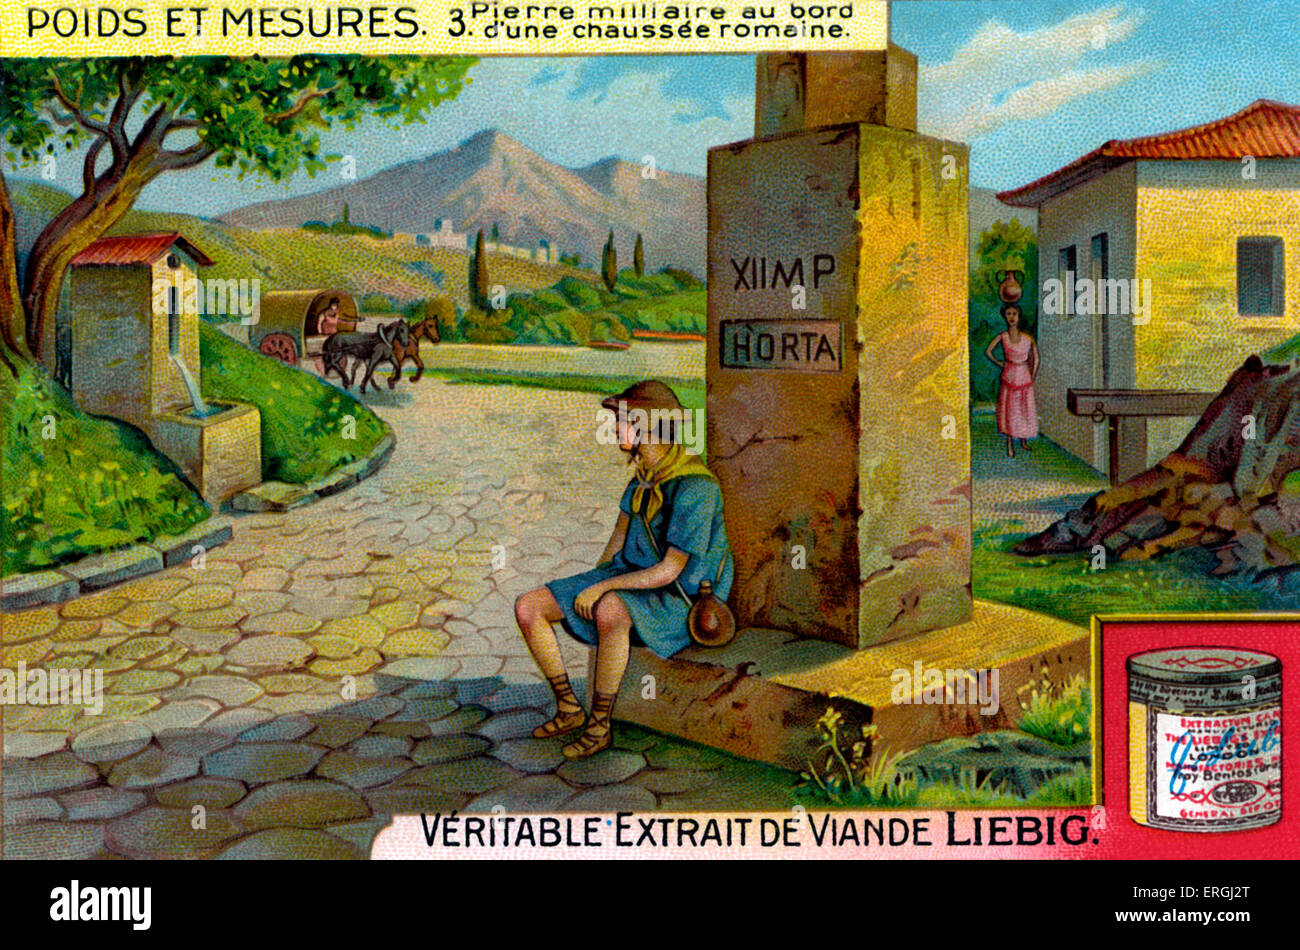 Milestone on a Roman road.  Illustration from Liebig collectible card series: 'Weights and Measures' ('Poids et mesures'). 3/6 Stock Photo